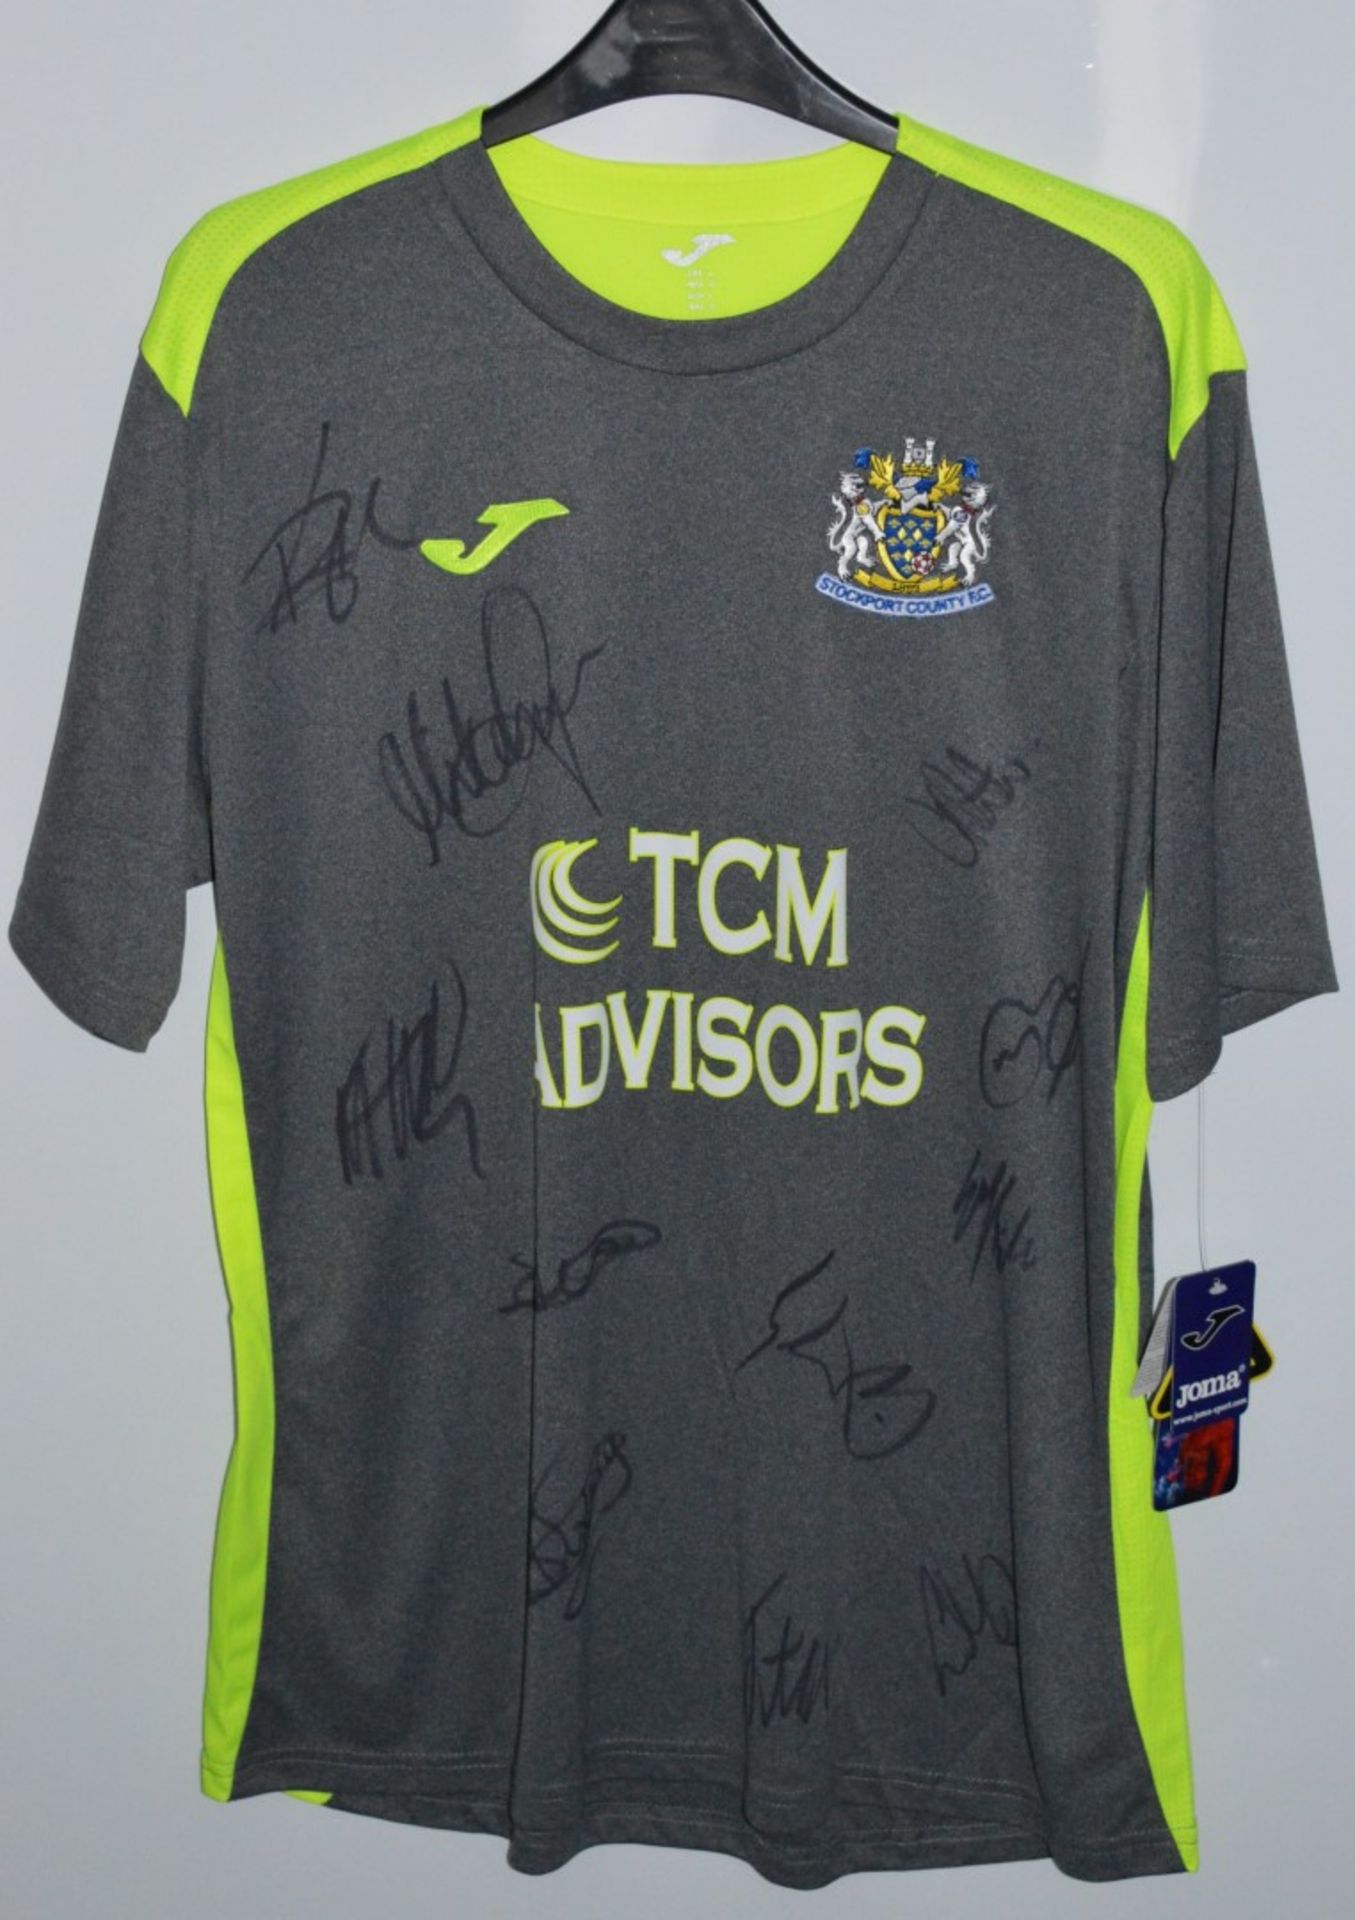 1 x Stockport County Signed Football Shirt - 2016/2017 Season Away Shirt Signed By 11 Players -